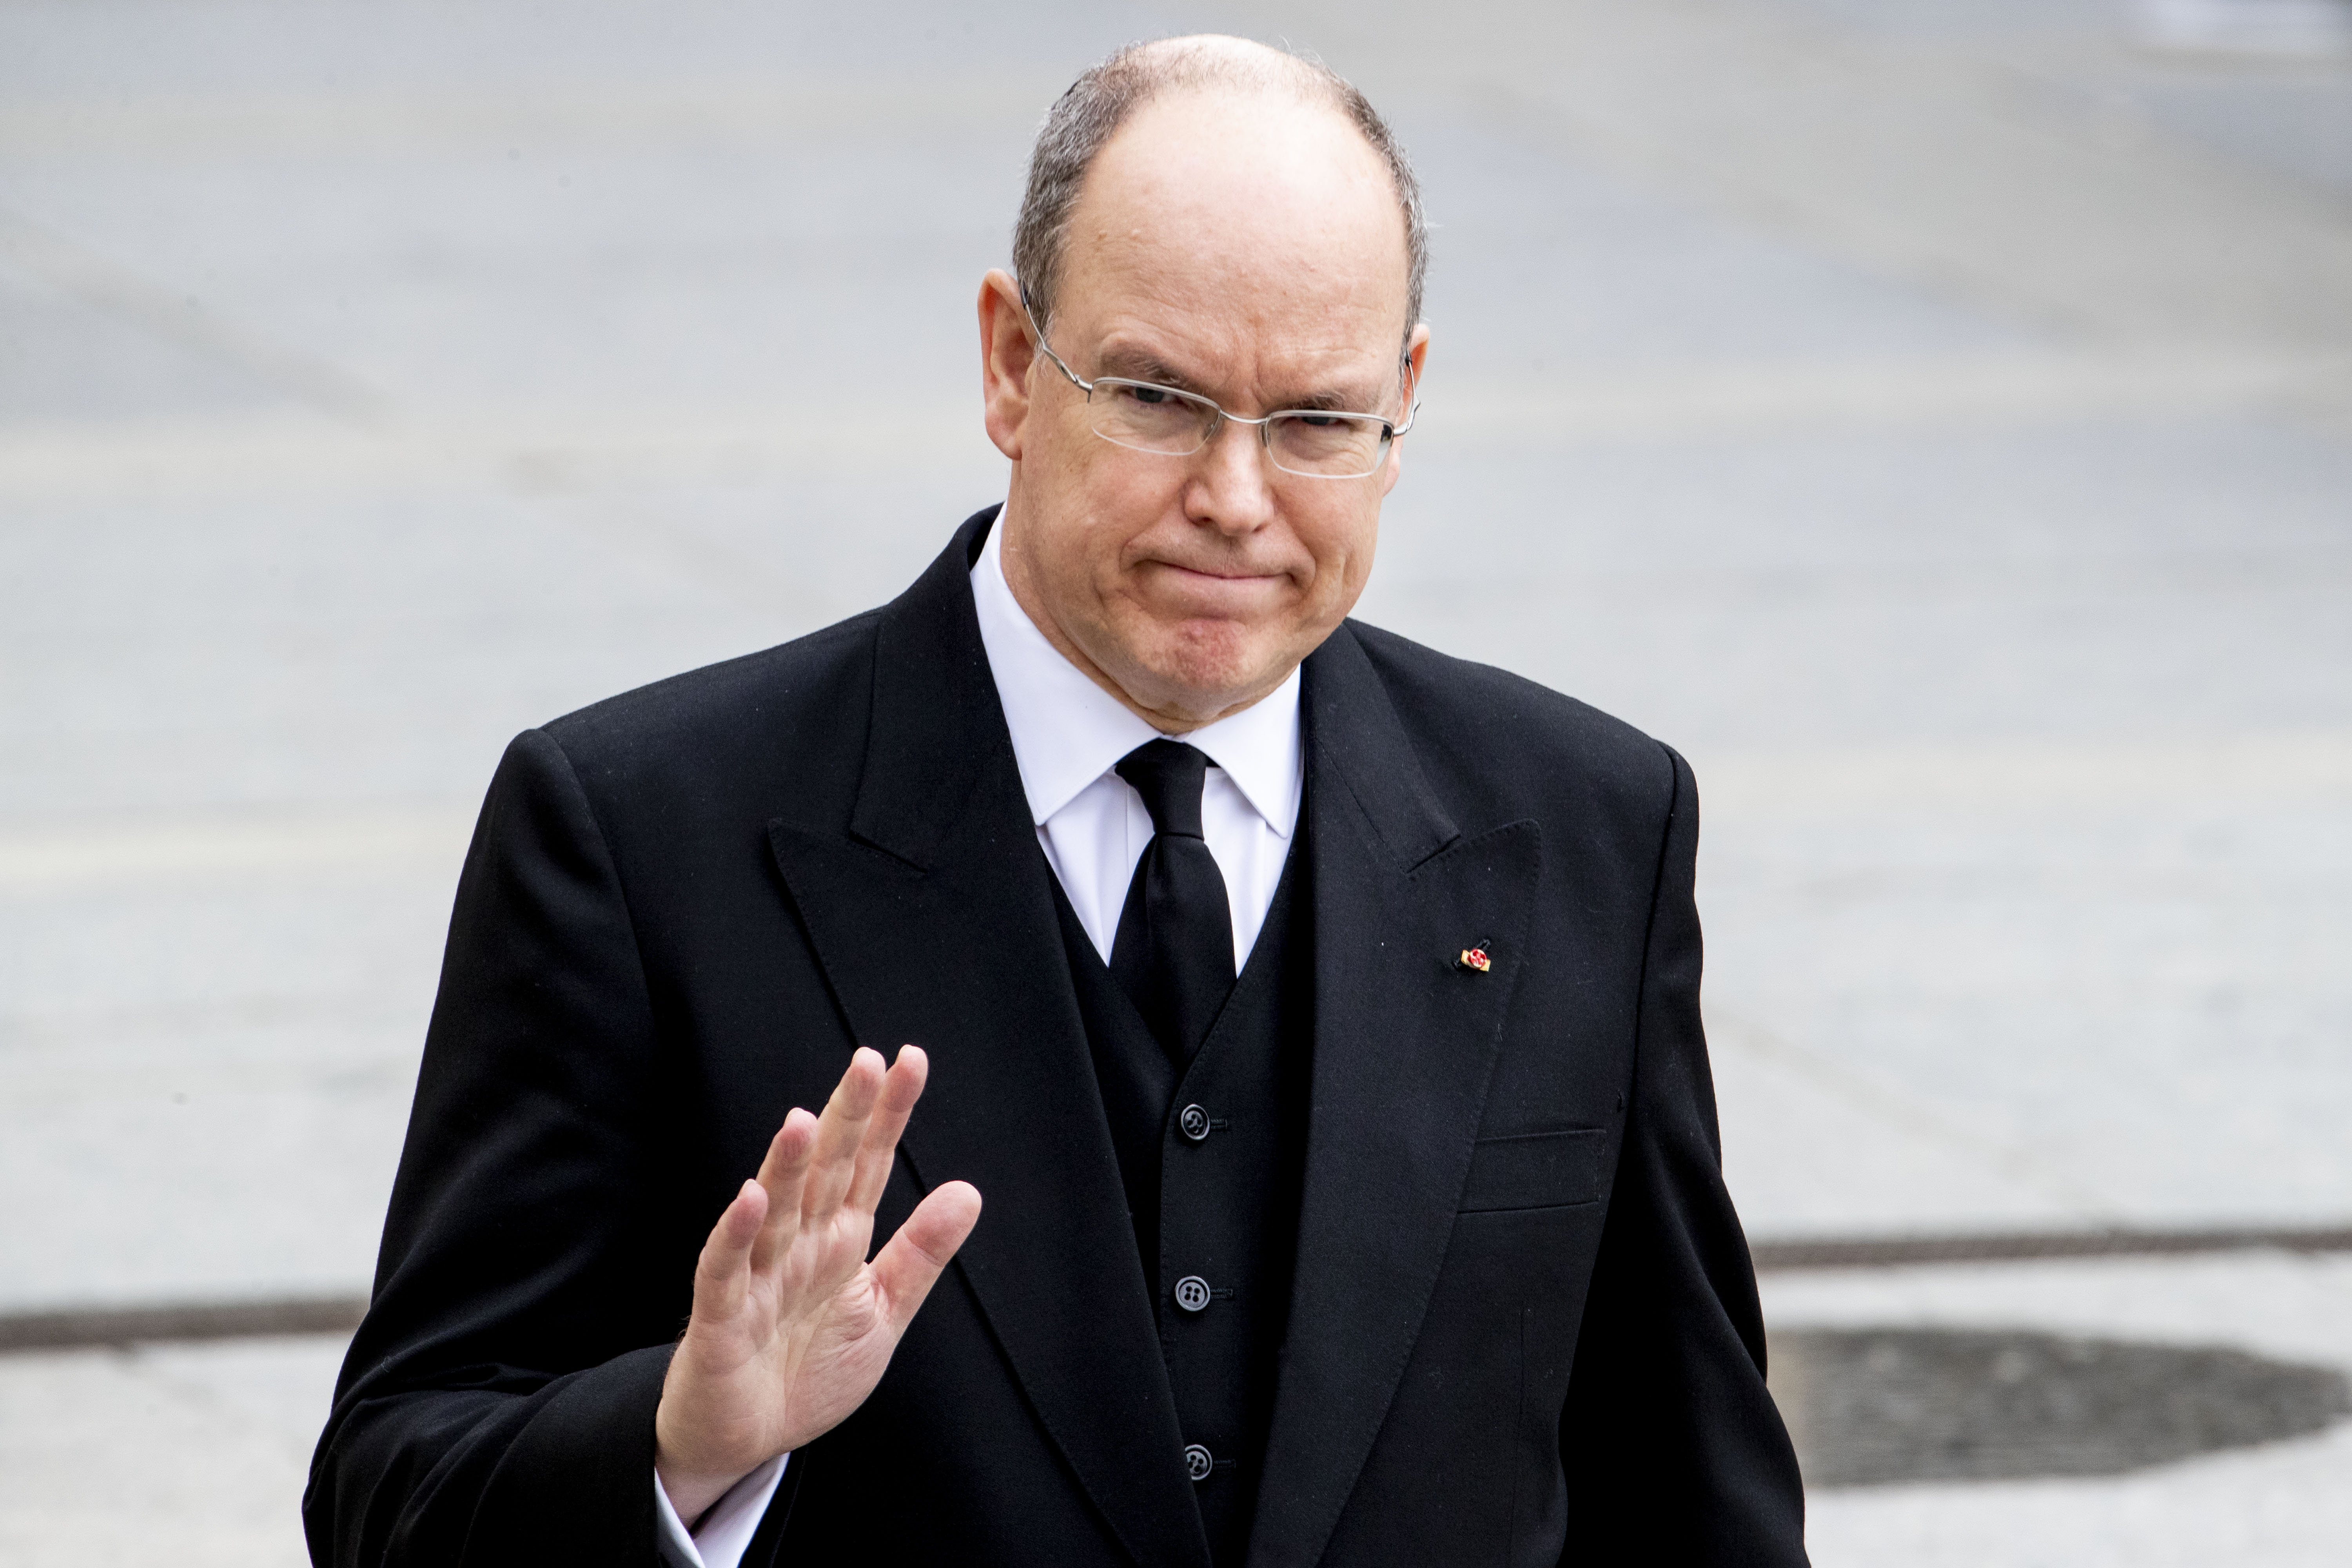 Prince Albert of Monaco at the funeral of Grand Duke Jean of Luxembourg on May 04, 2019 in Luxembourg, Luxembourg. | Source: Getty Images